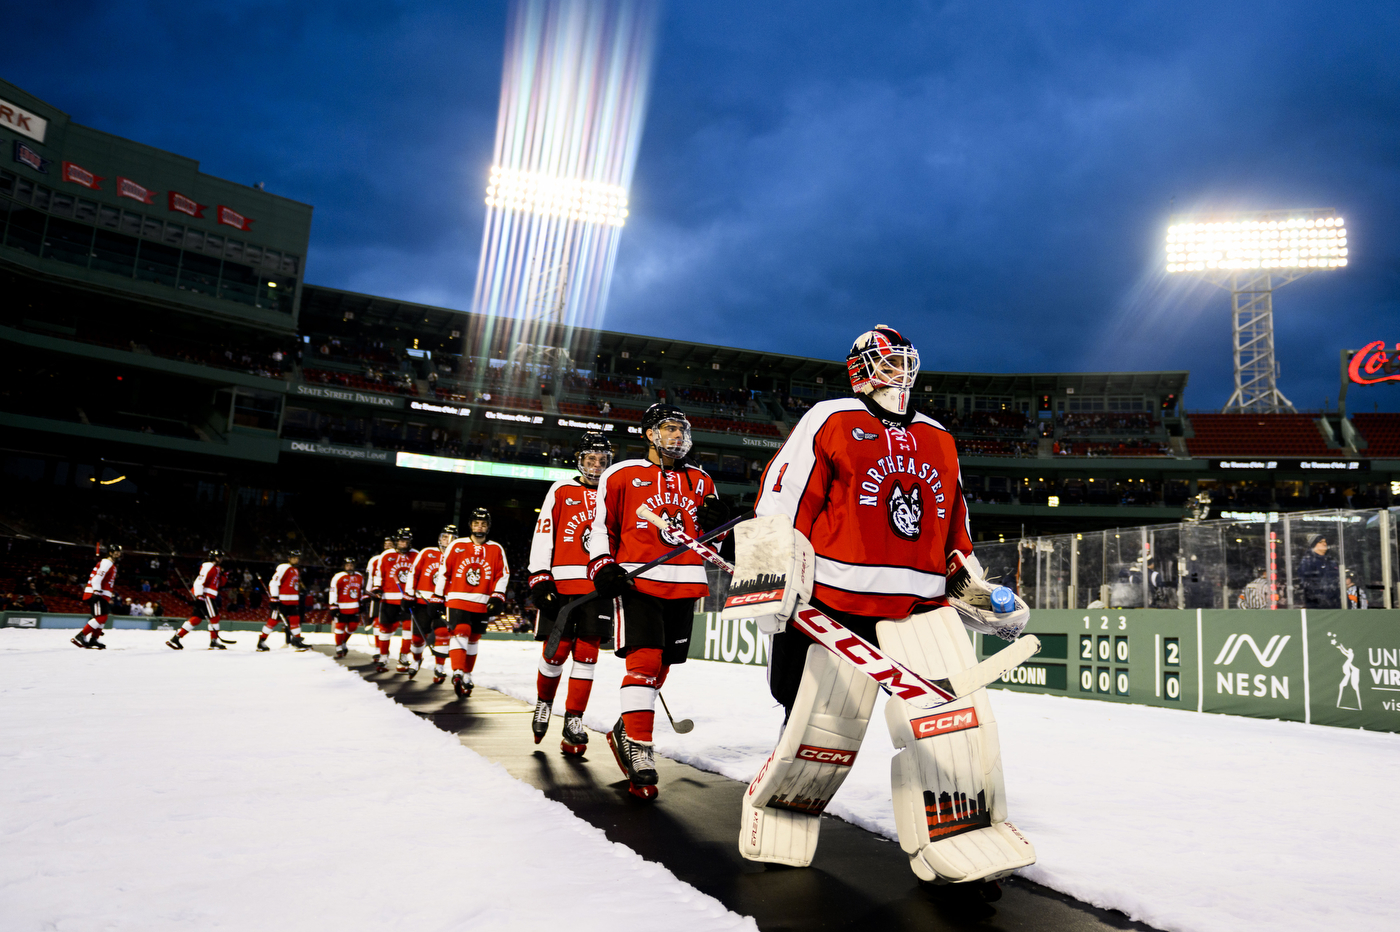 A row of Northeastern hockey players walking over to an ice skating rink in Fenway Park. 